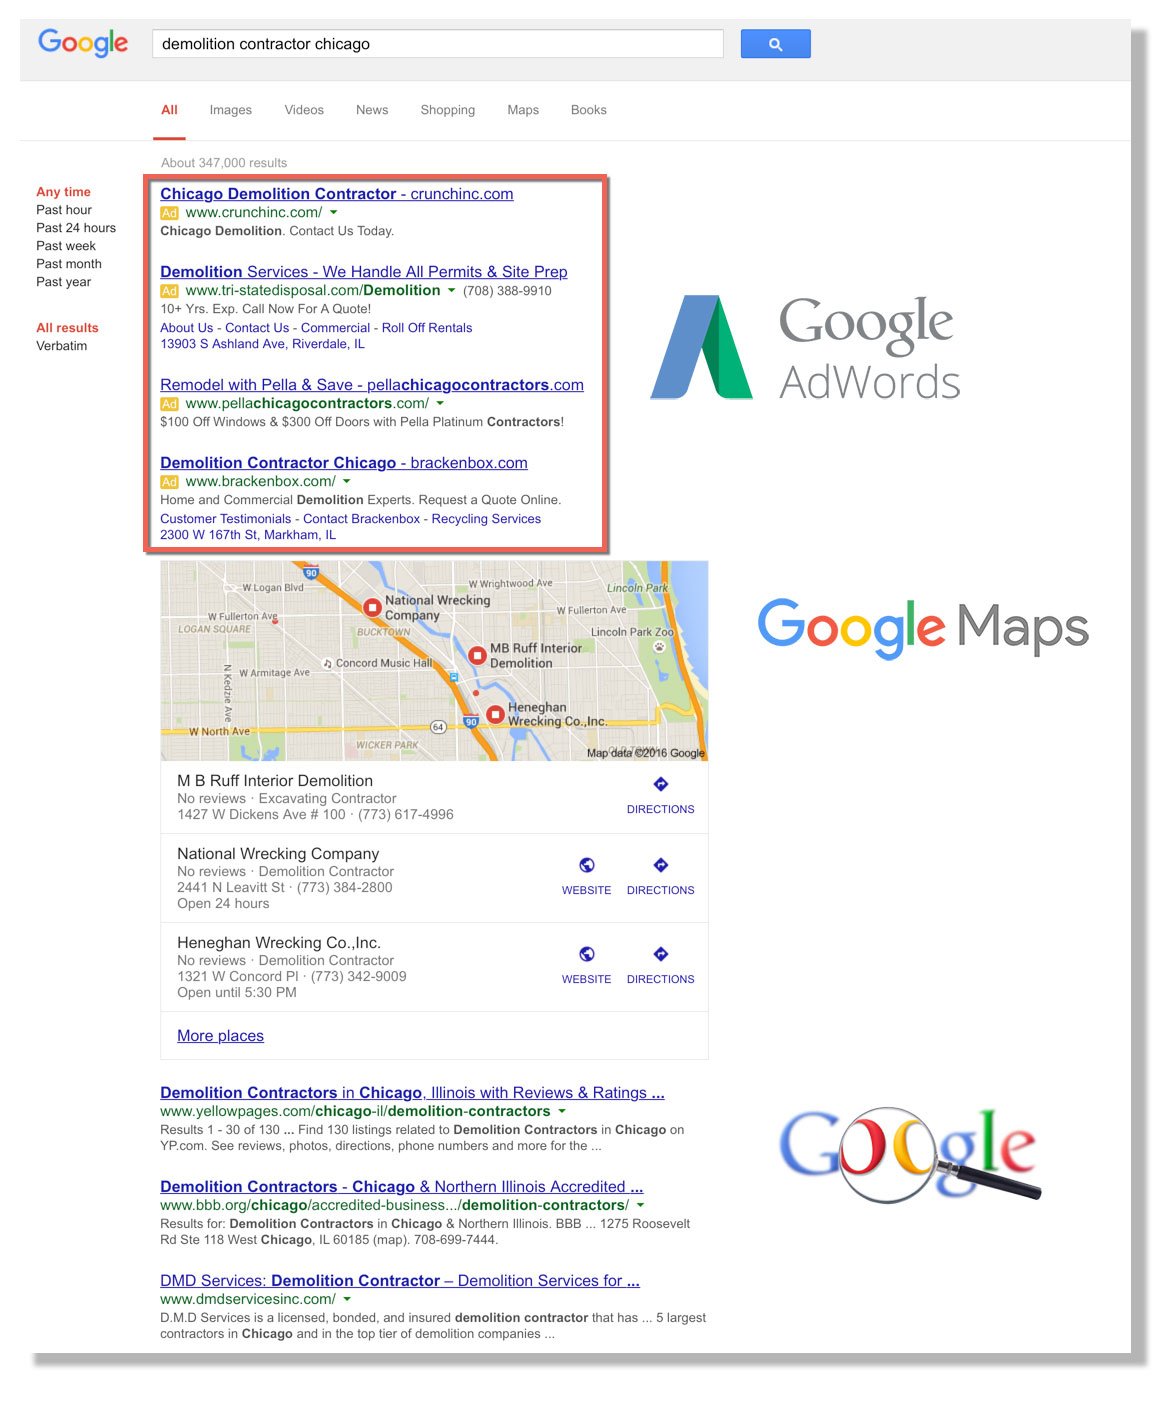 Google Adwords - Paid Search